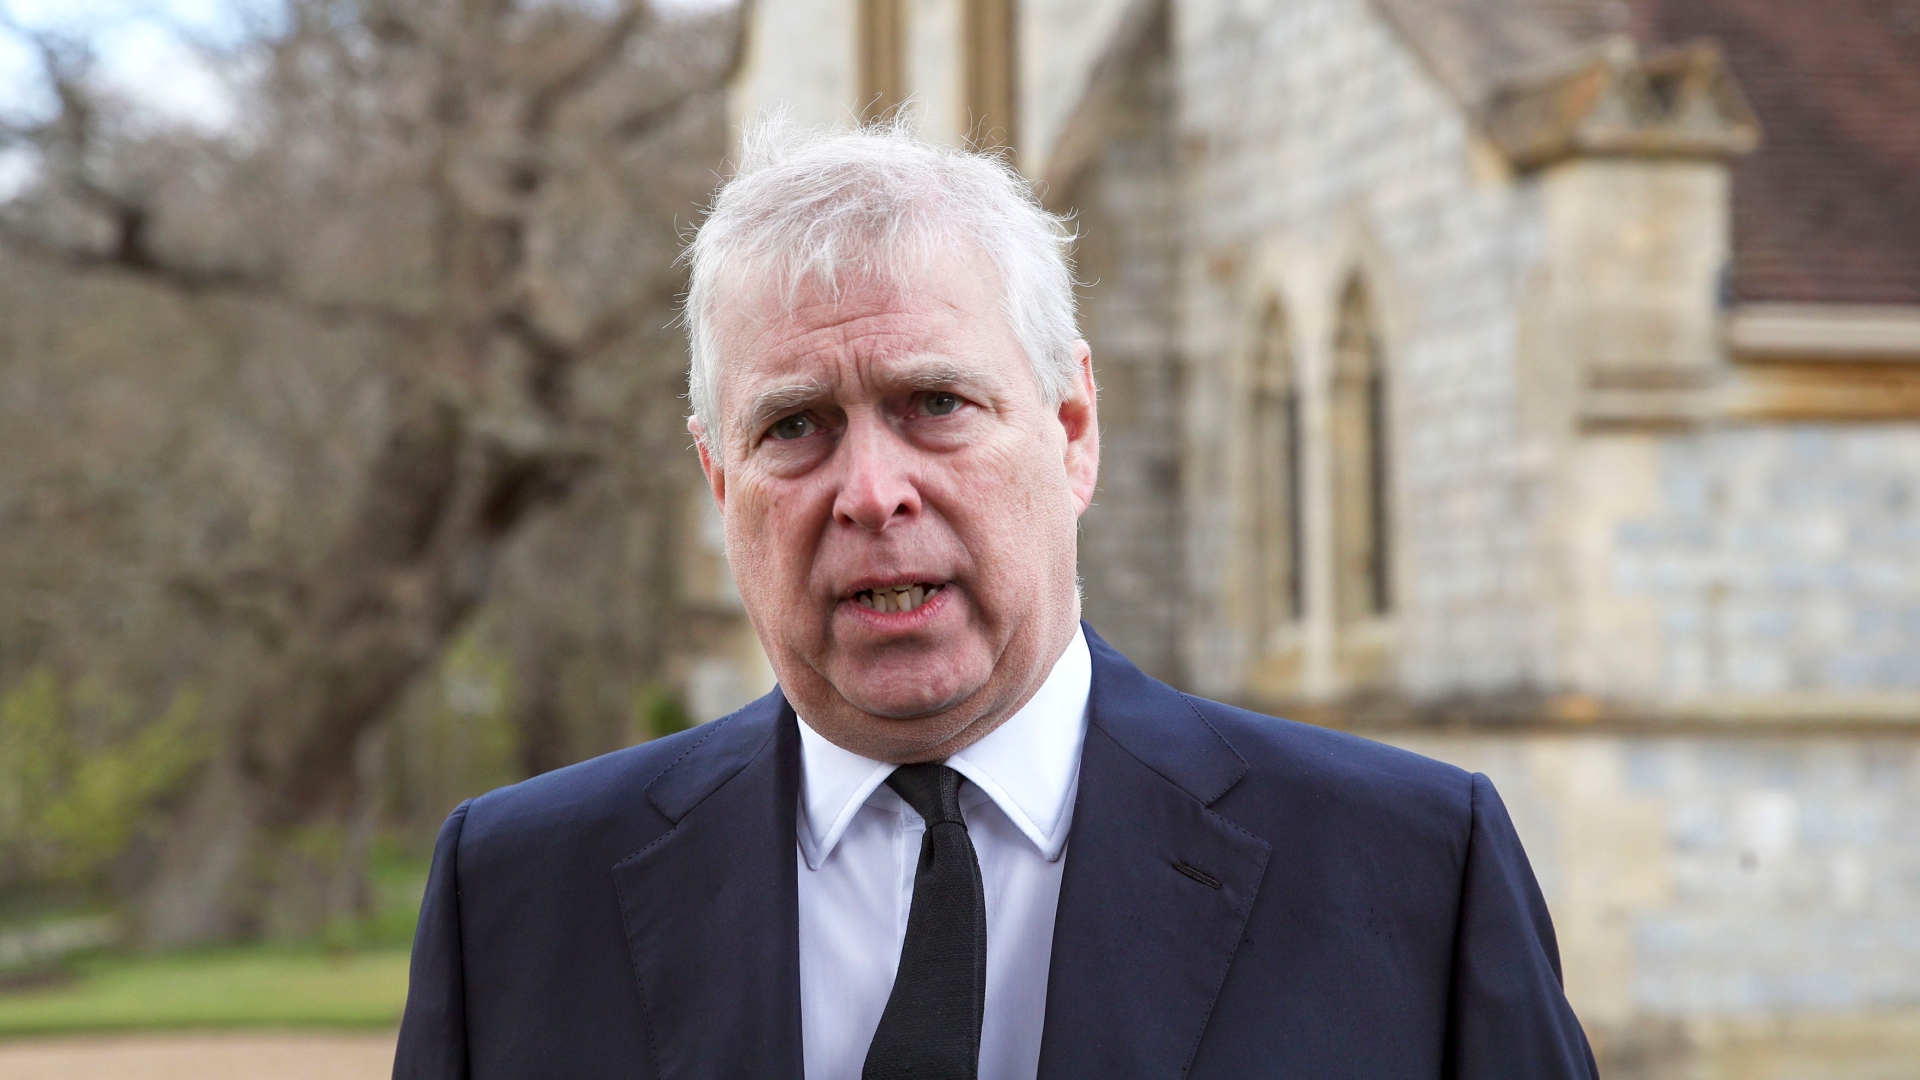 Documents in court suggest that Prince Andrew met Jeffrey Epstein during the time paedophile Jeffrey Epstein had been placed under house arrest.